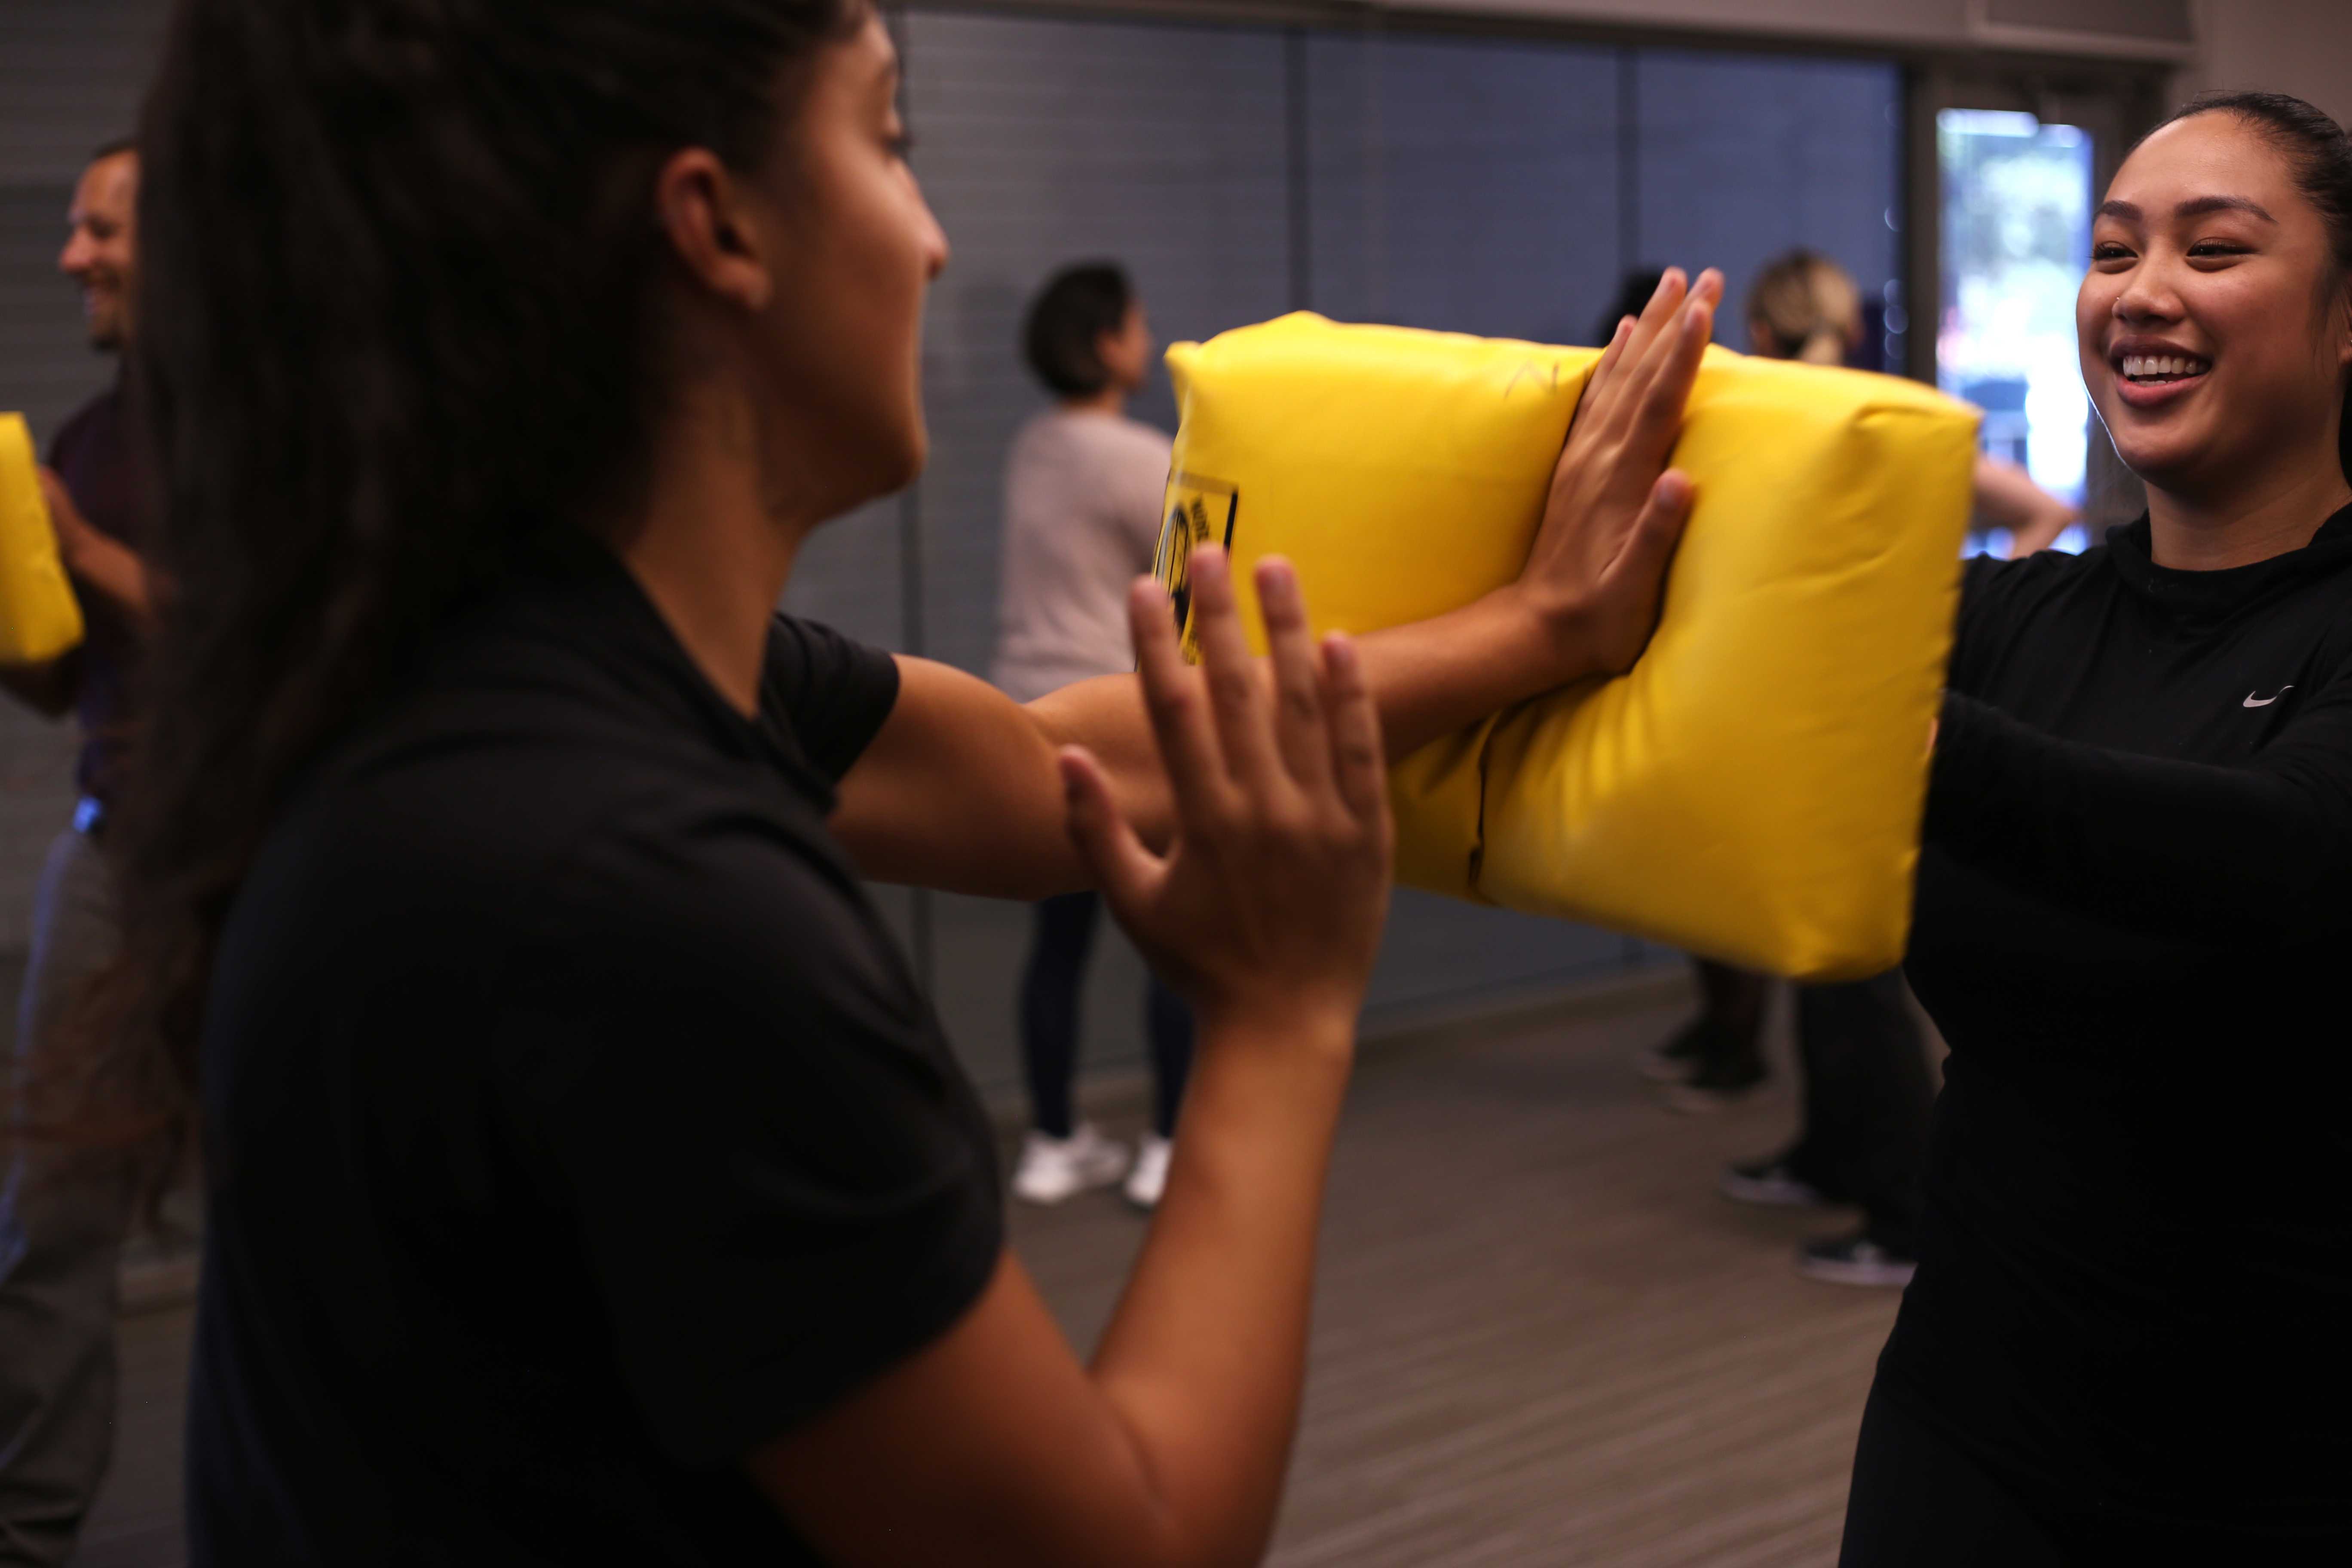 Biology major Shannon Changizi and Vanessa Mariano, a business management major, practice a striking technique during the self-defense workshop at the Mashouf Center on Wednesday, Sept. 19. (Christian Urrutia/Golden Gate Xpress)